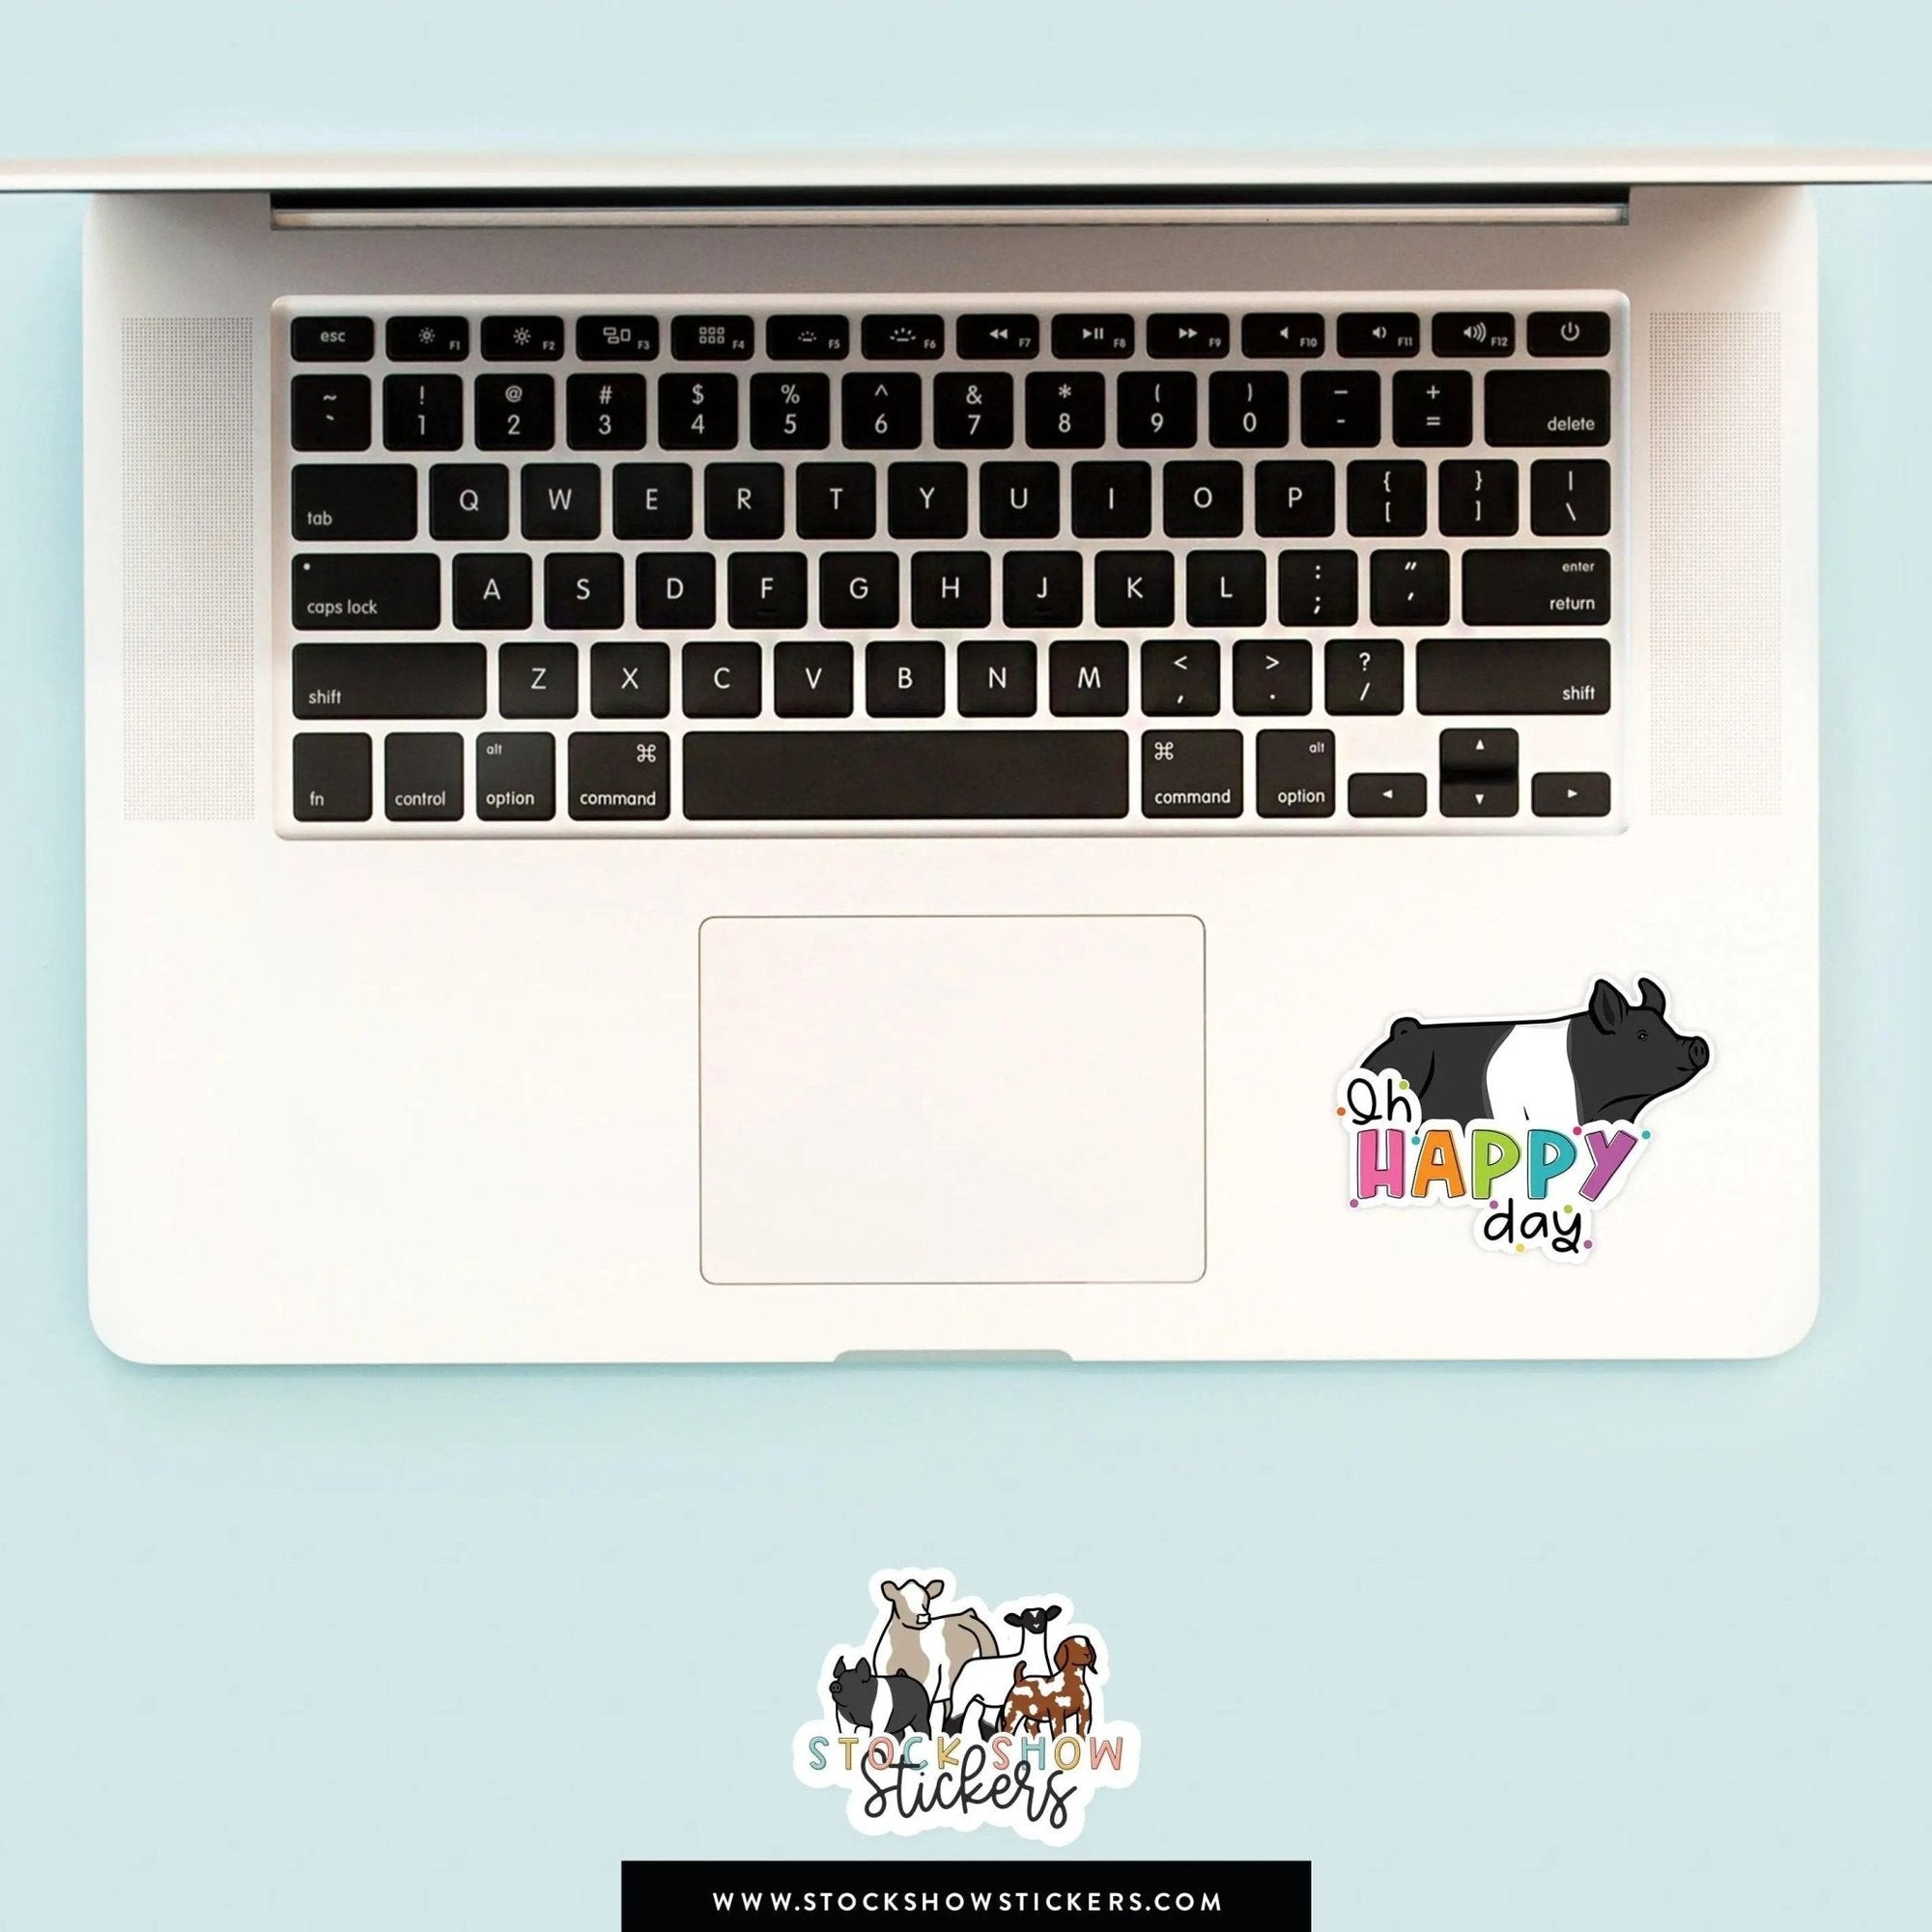 Personalized-Livestock-Oh Happy Day Livestock Stickers